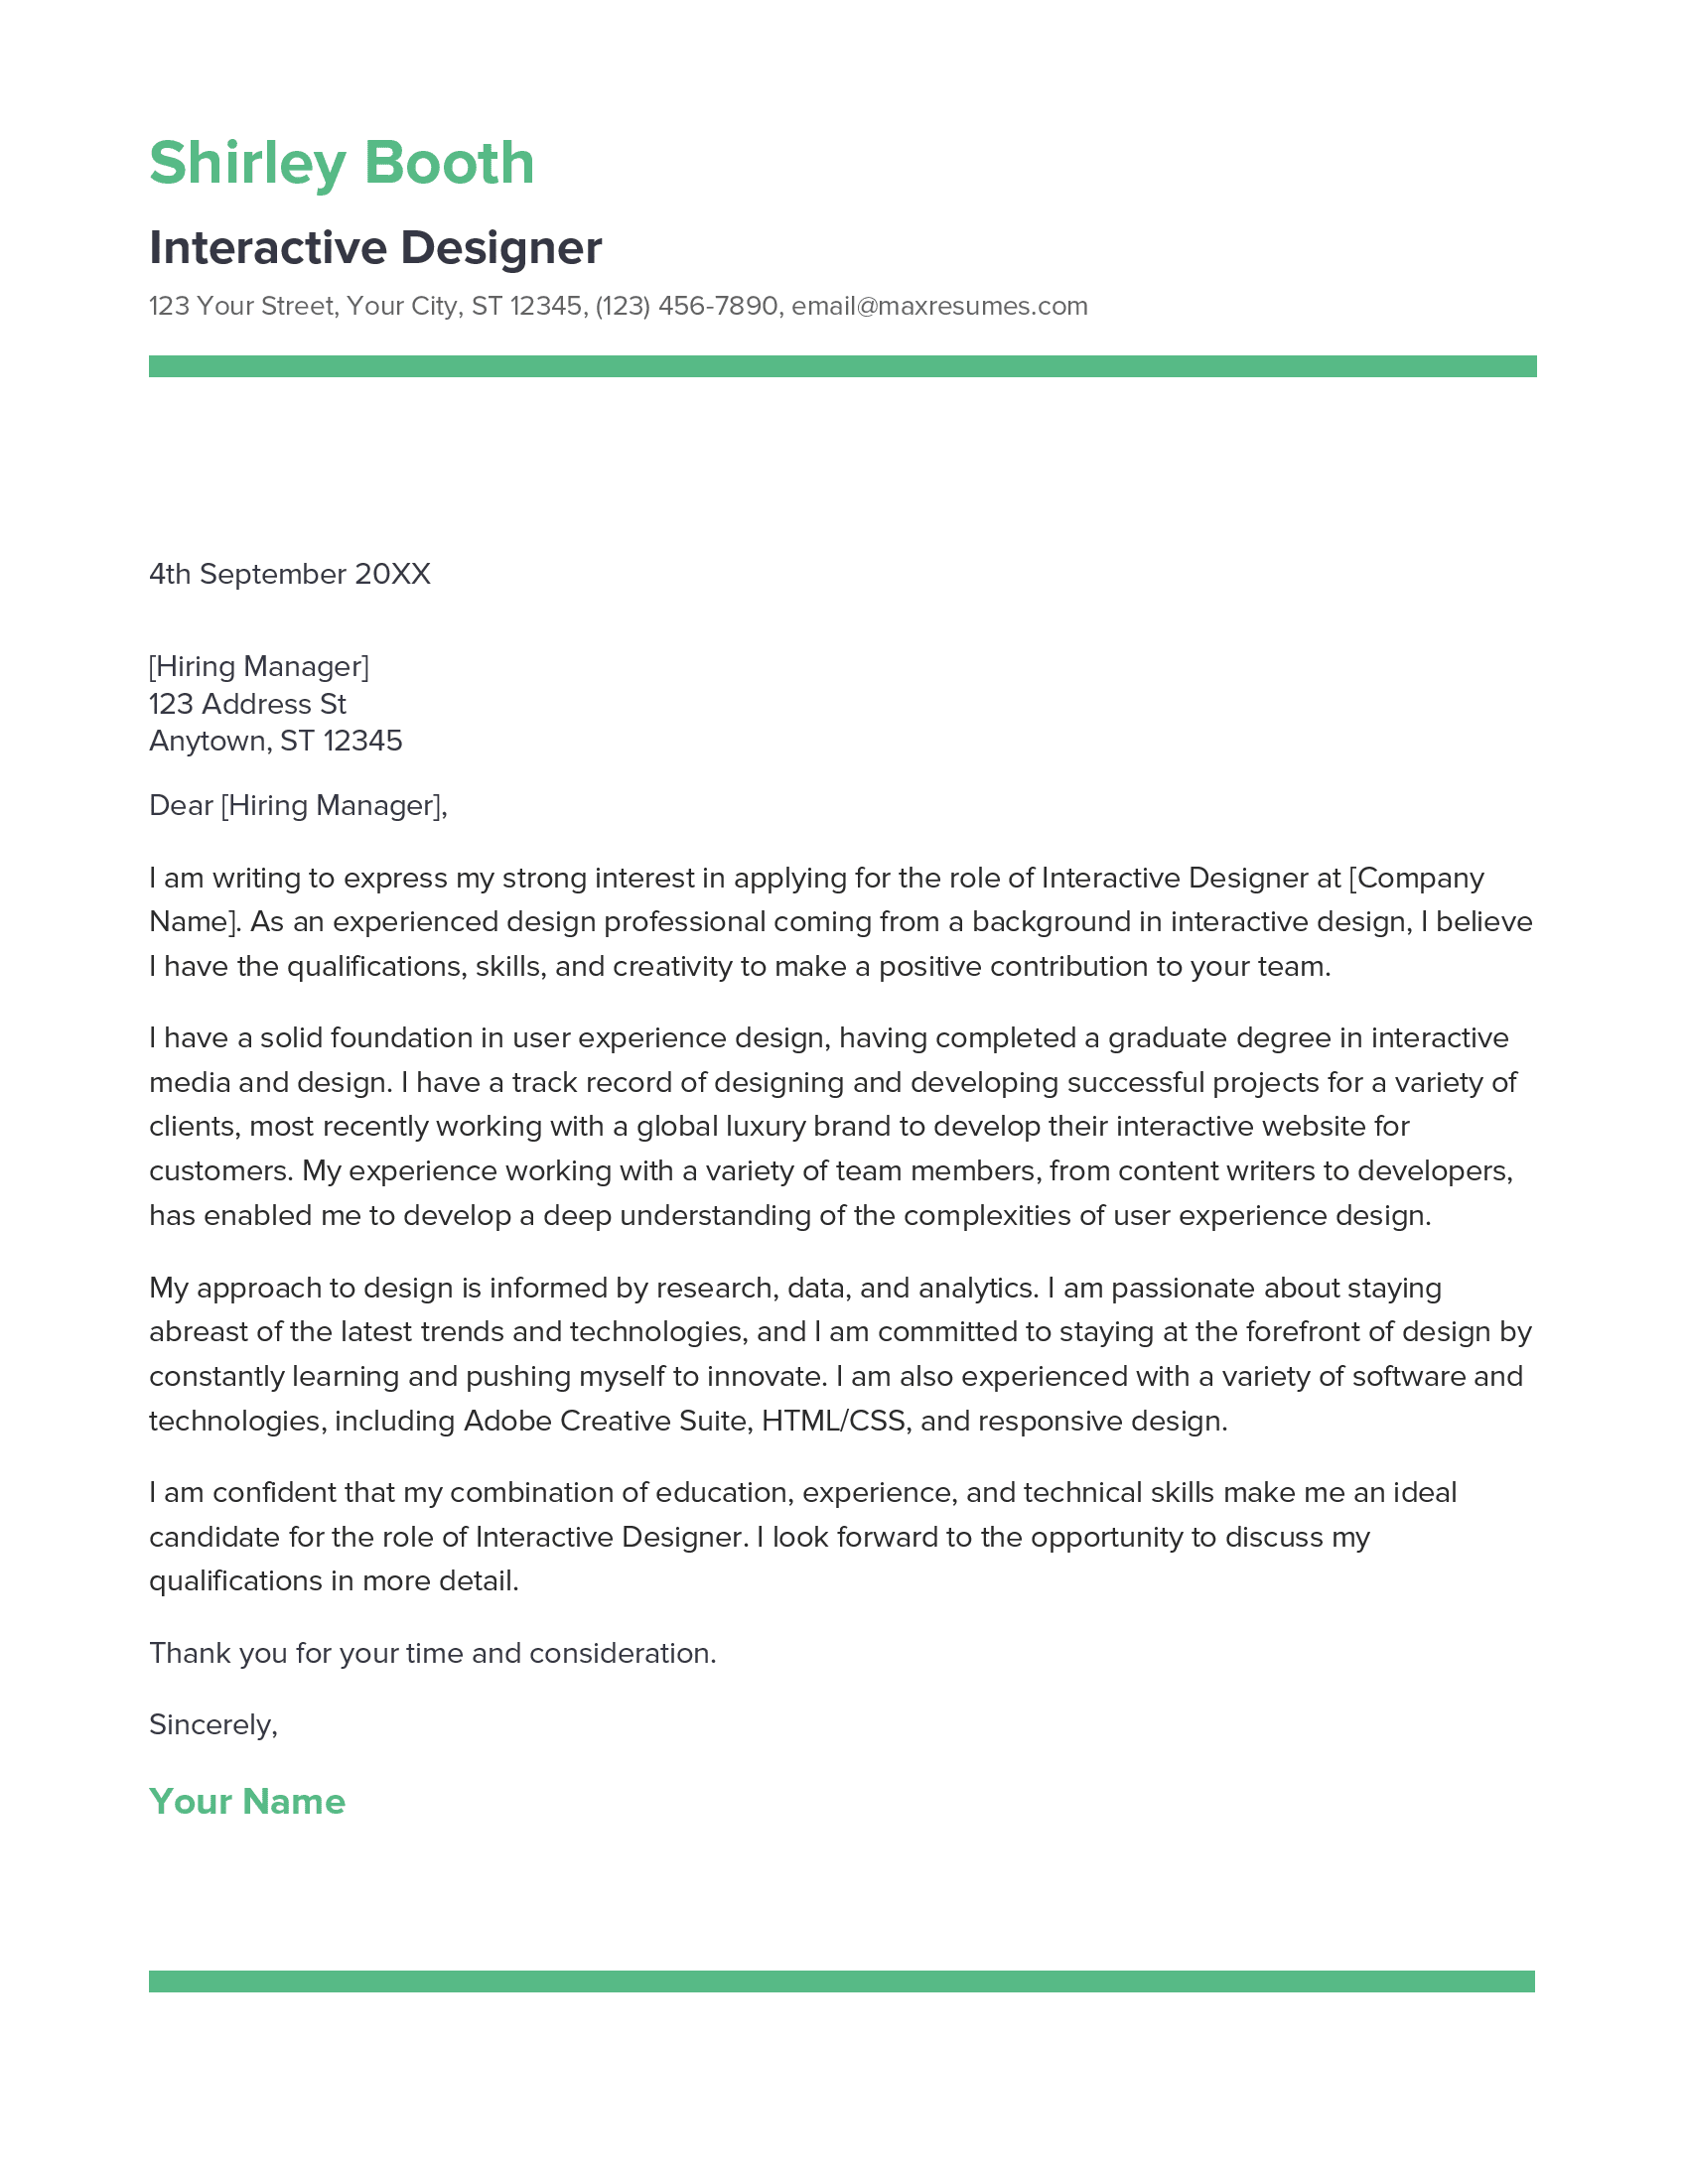 Interactive Designer Cover Letter Example